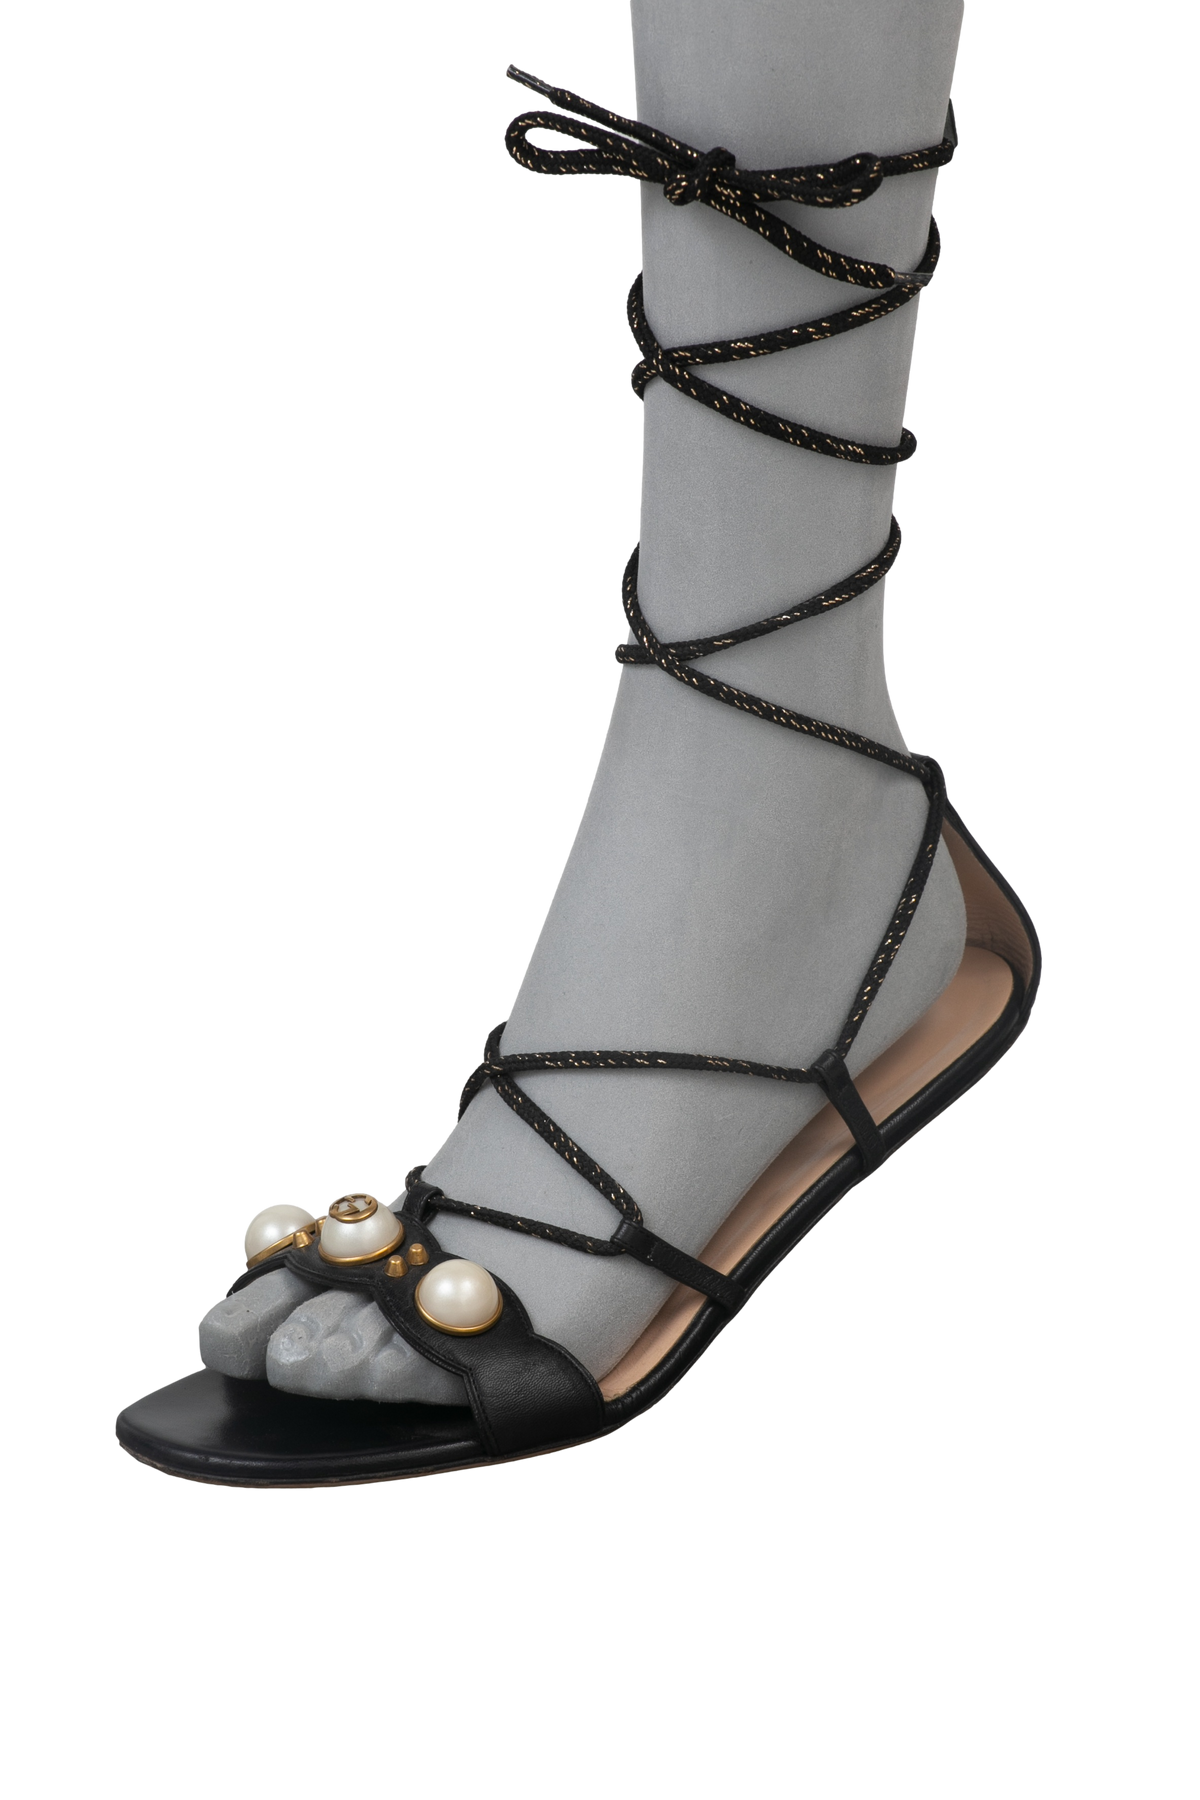 DESAPEGO THASSIA NAVES GUCCI SANDAL ANKLE STRAPS